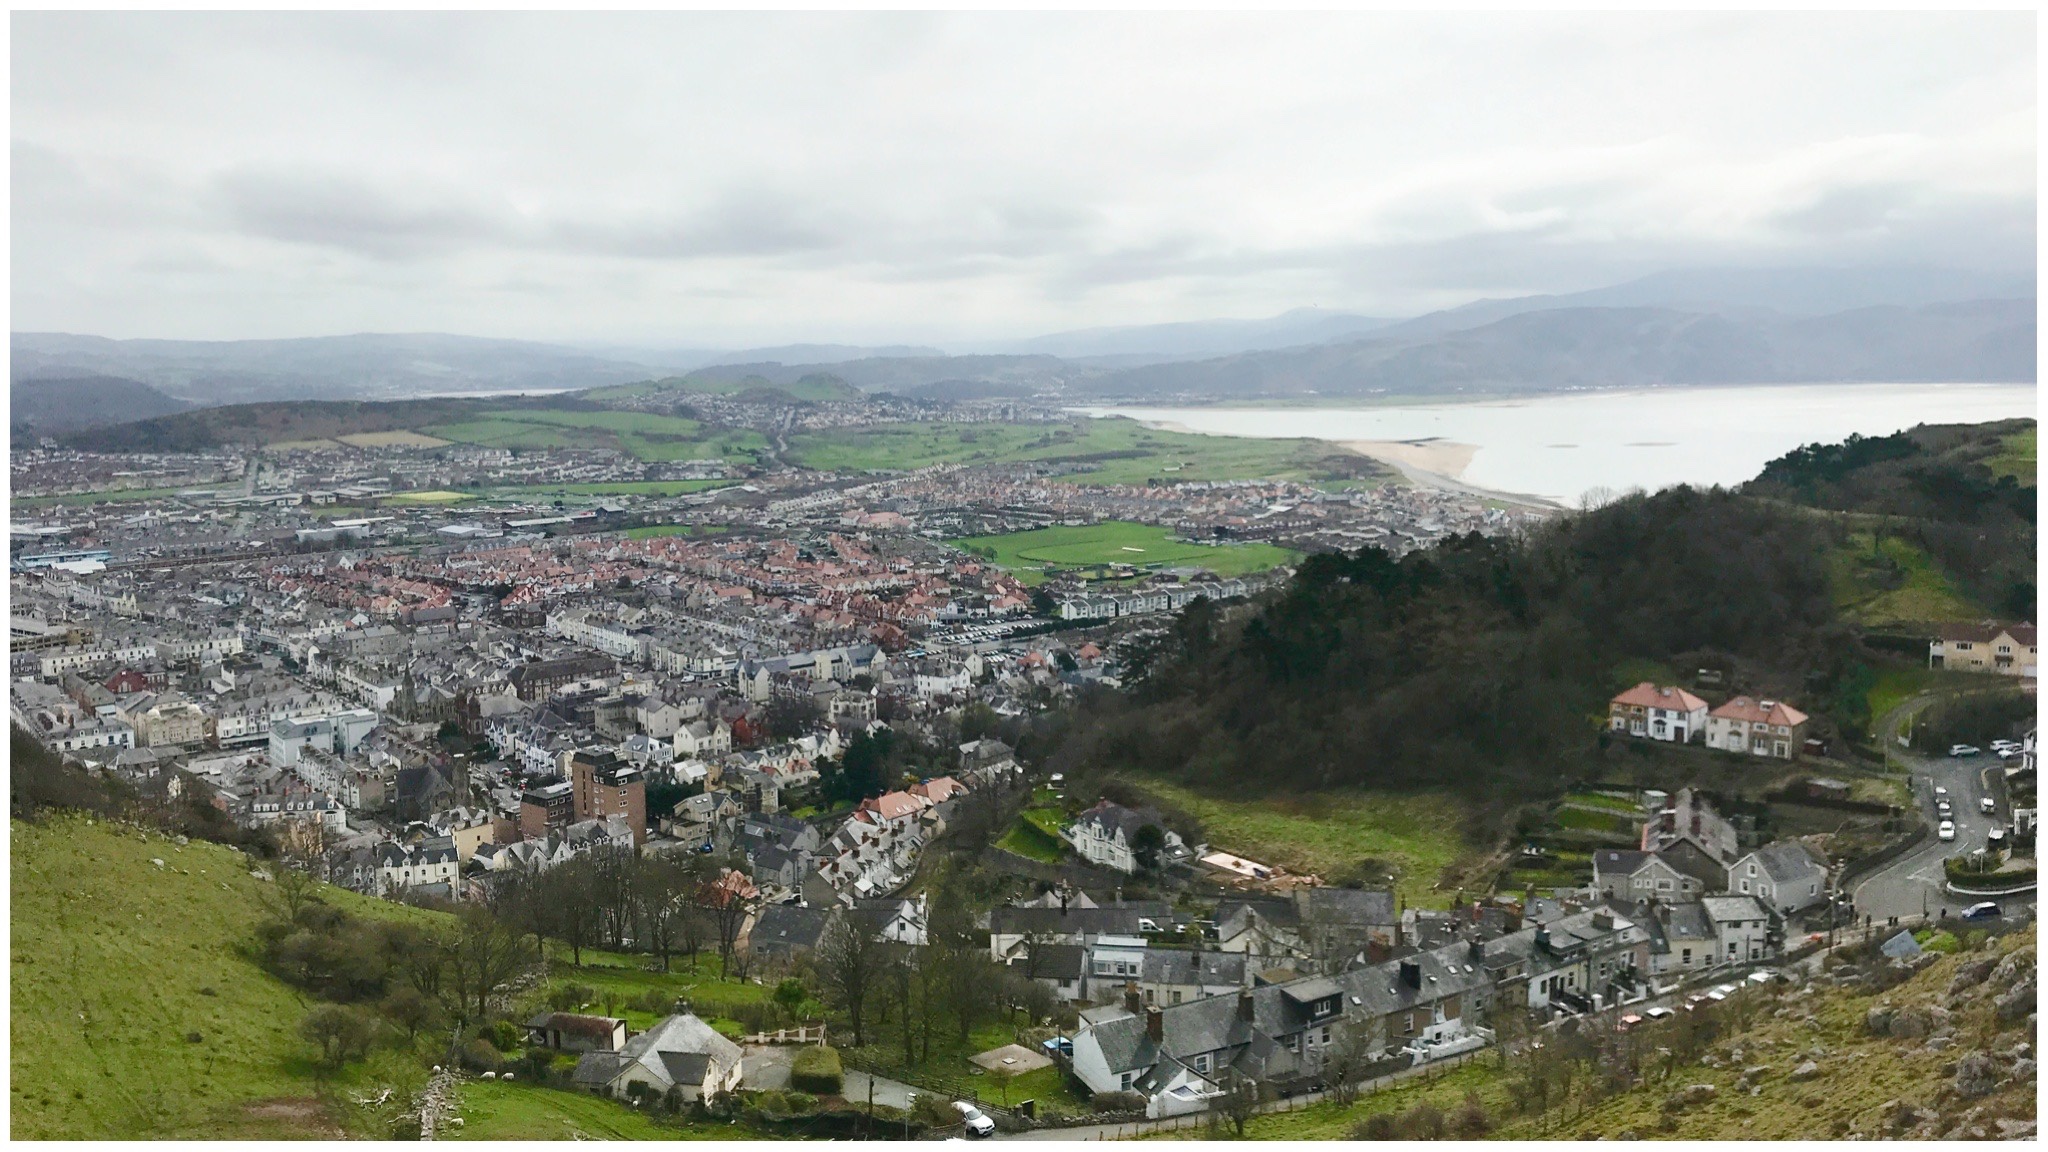 View of Llandudno from the Great Orme Cable Cars